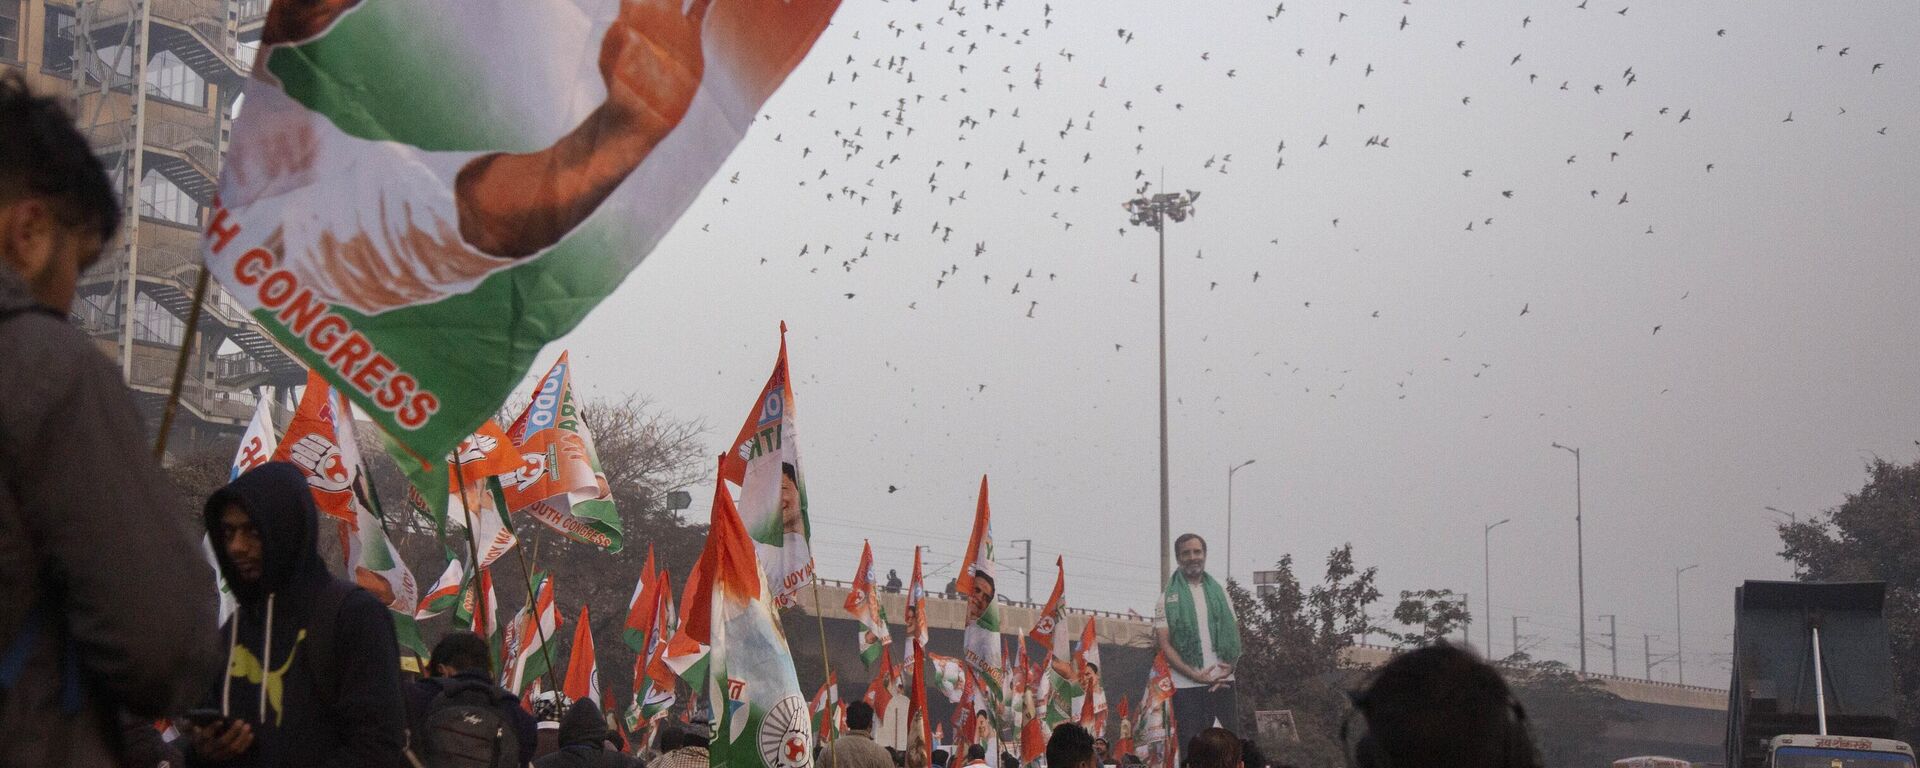 Congress Party supporters hold party flags and walk with their leader Rahul Gandhi during a march in New Delhi, India, Saturday, Dec. 24, 2022. - Sputnik India, 1920, 11.01.2023